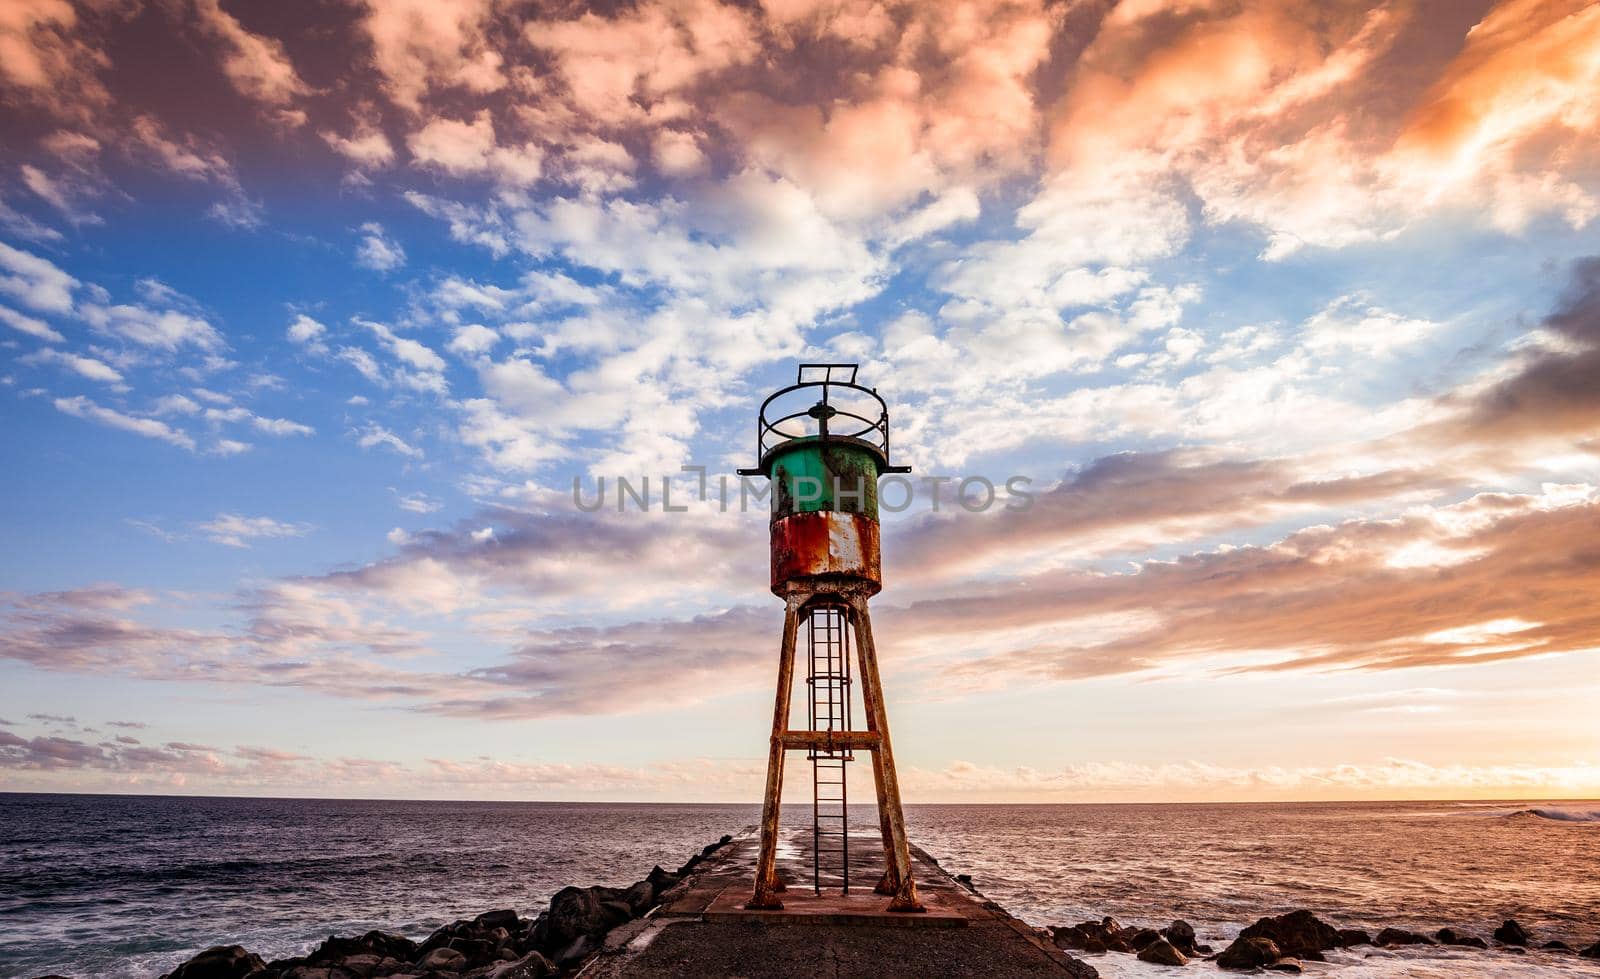 Jetty and lighthouse in Saint-Pierre, La Reunion island by photogolfer